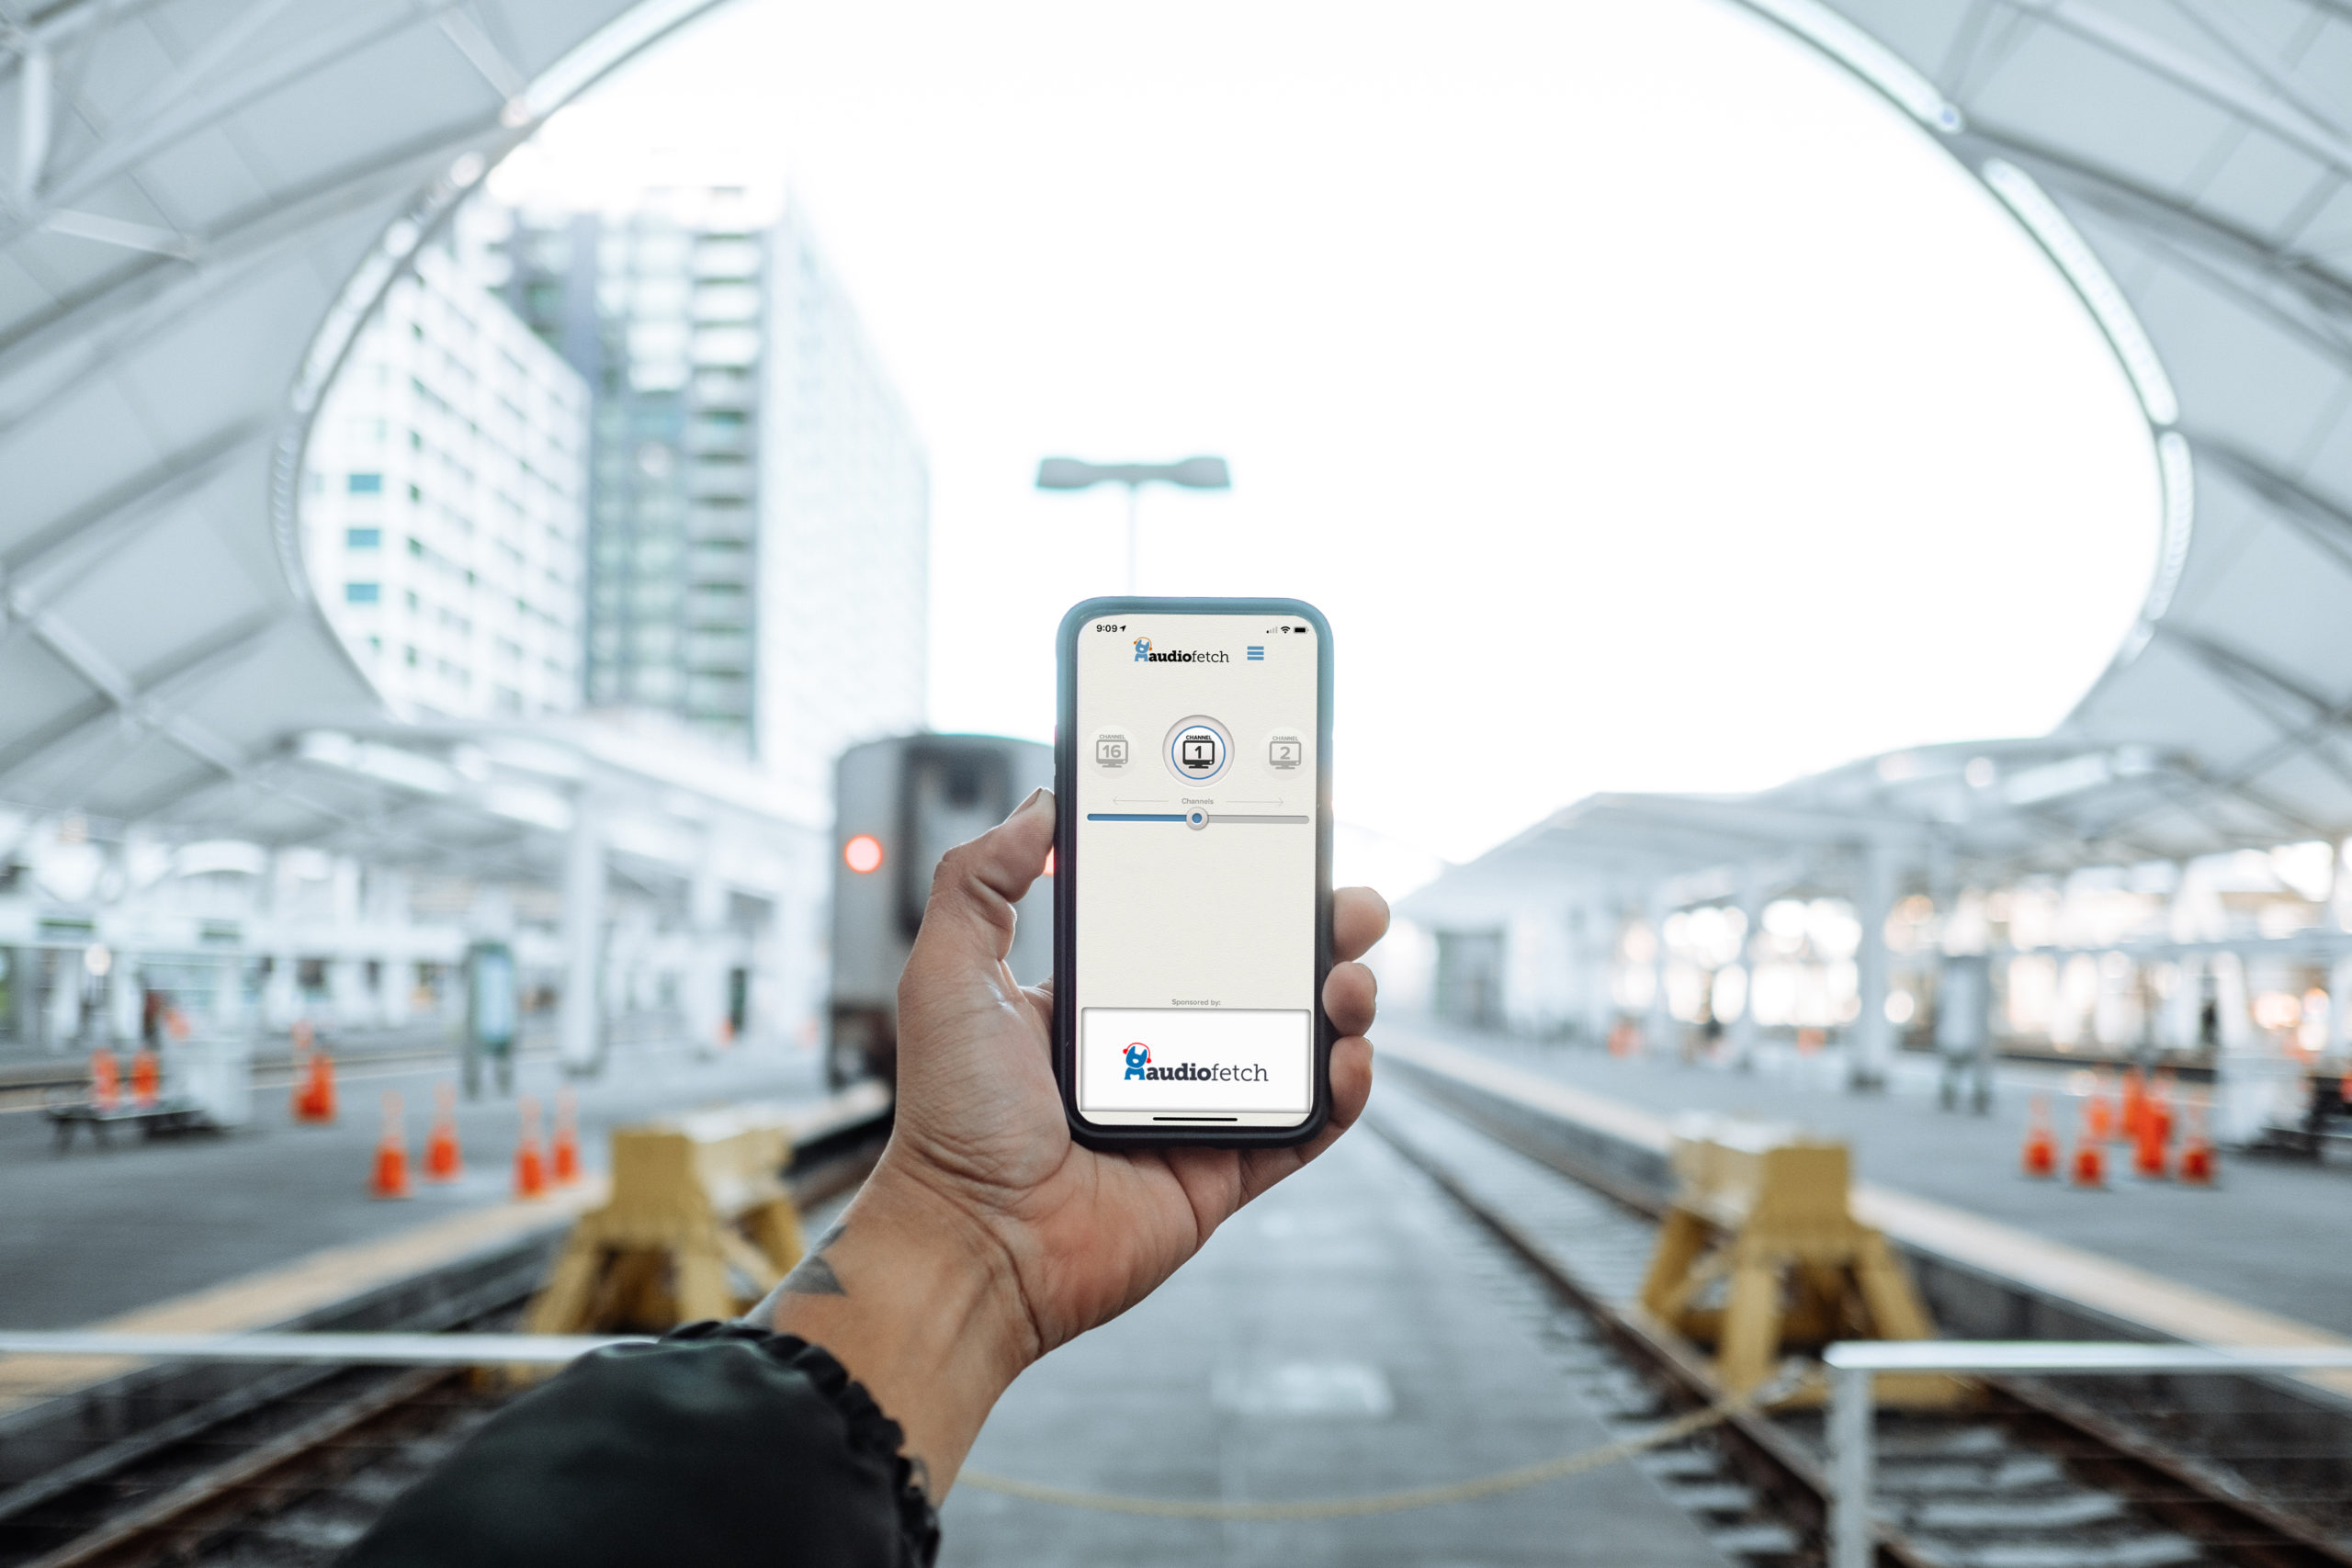 AudioFetch App Being Used at Train Station